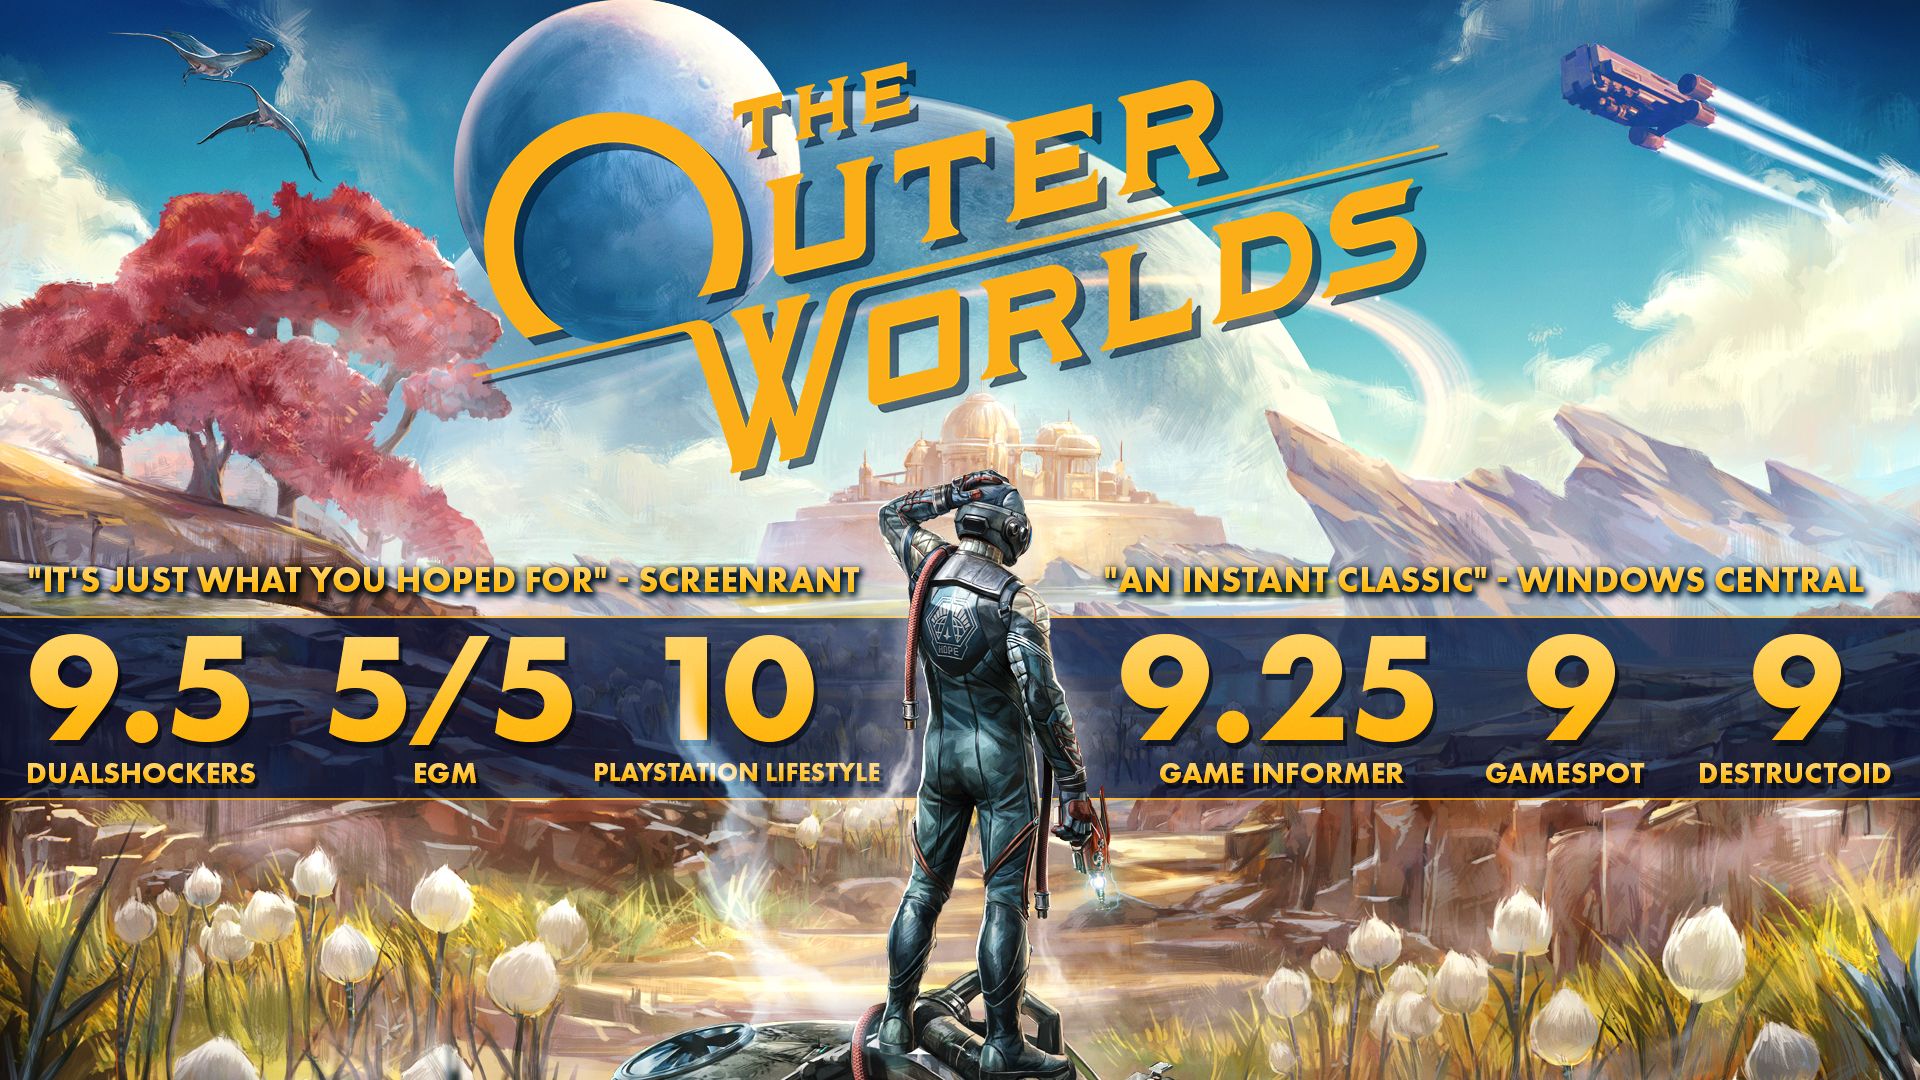 The Outer Worlds. PC Epic Games